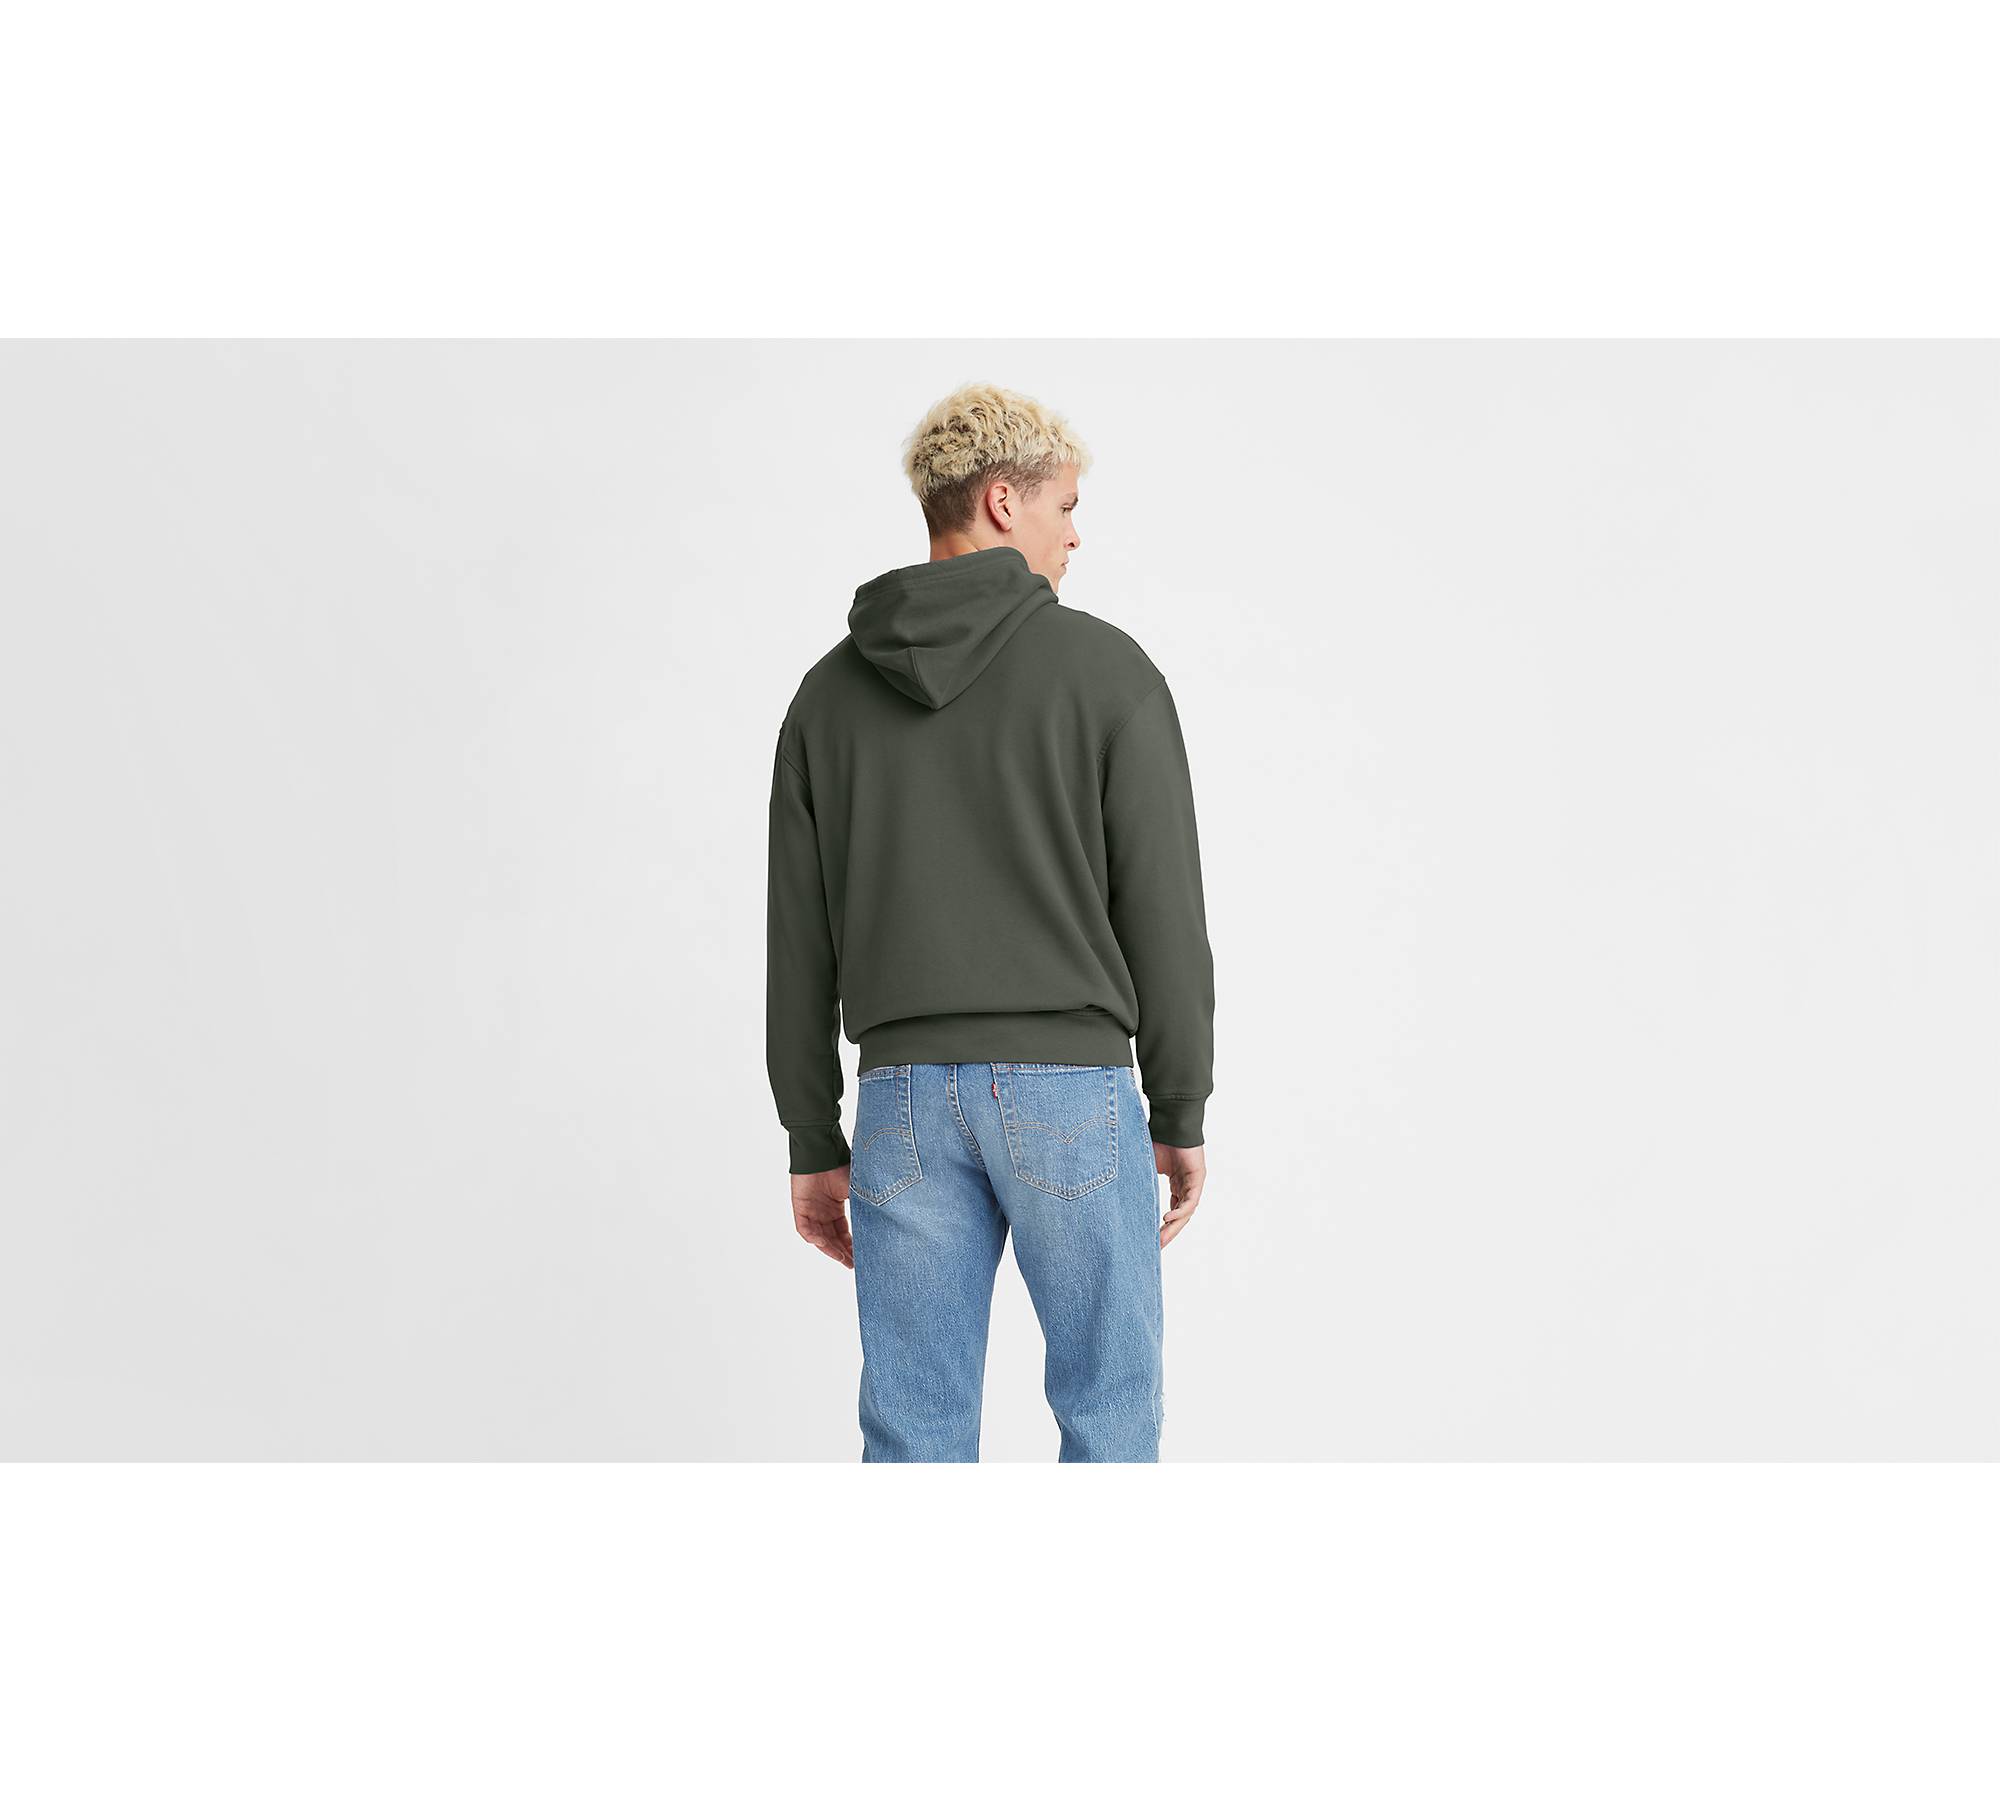 Graphic Hoodie - Green | Levi's® US